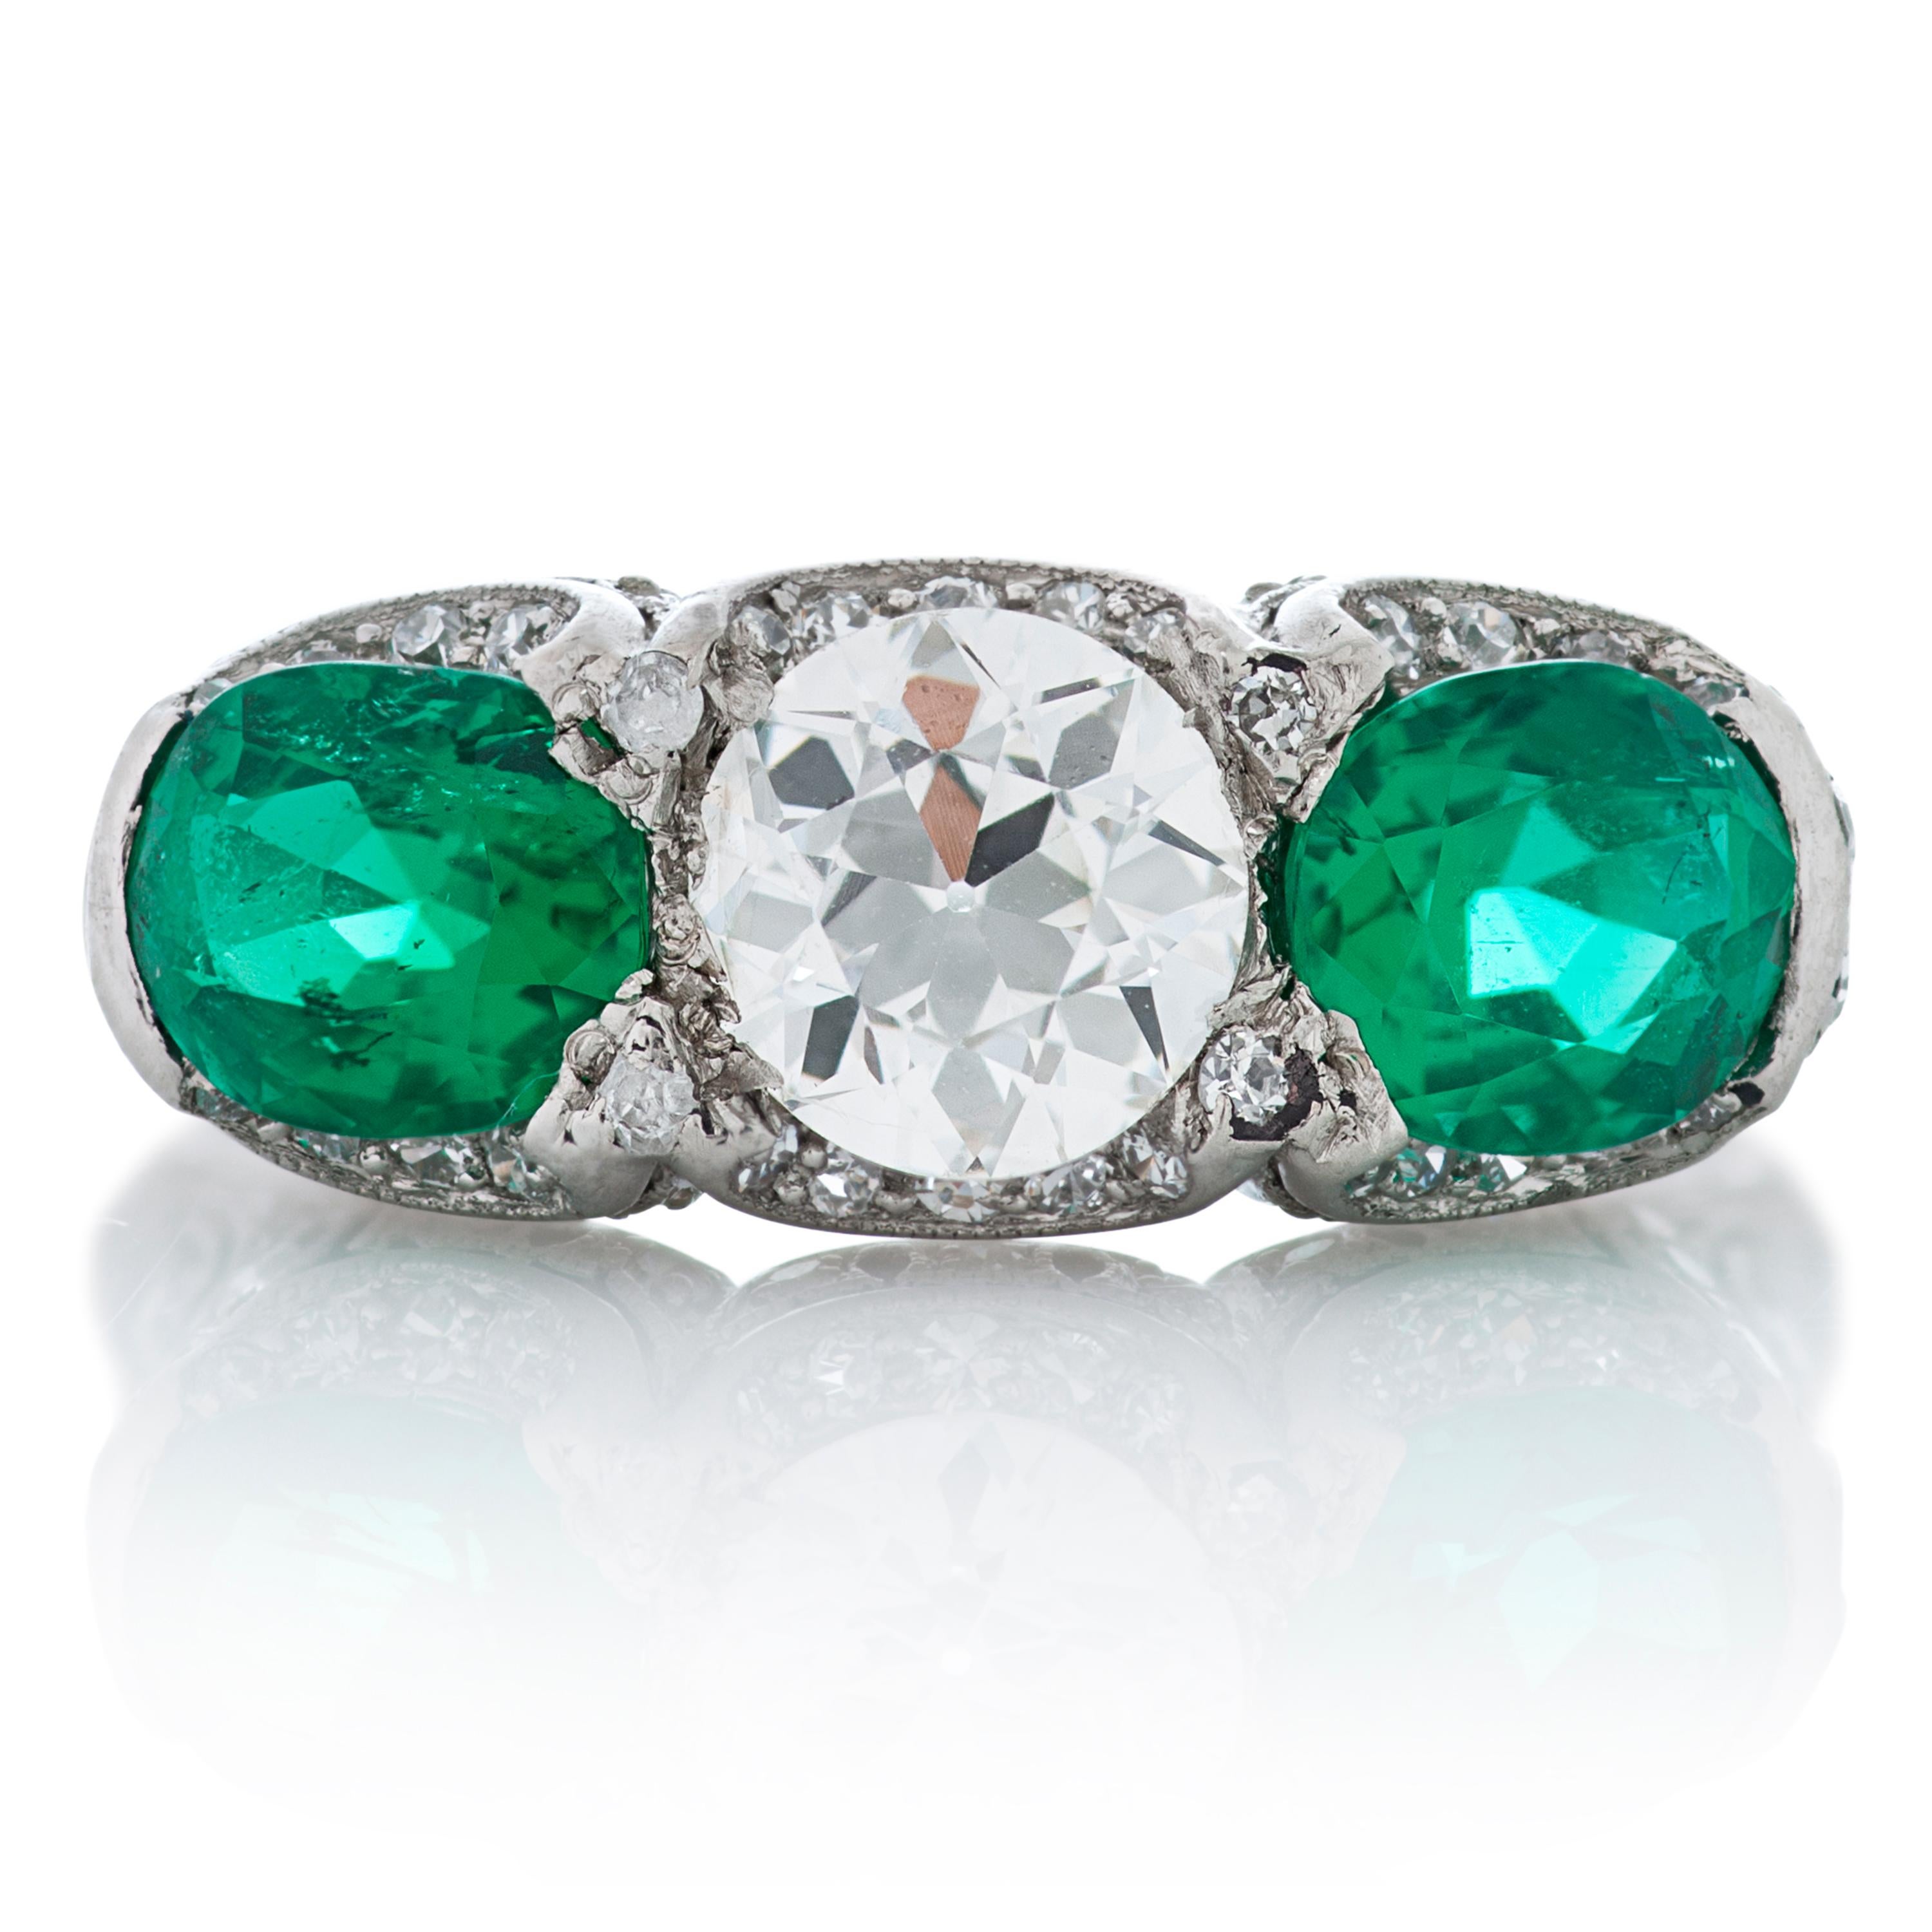 J. E. Caldwell & Co. Art Deco platinum emerald and diamond ring.  Two cushion cut emeralds weighing a total of 1.37 carats are set on either side of one Old European Cut diamond weighing 0.84 carat with estimated G color and VS clarity.  The ring is